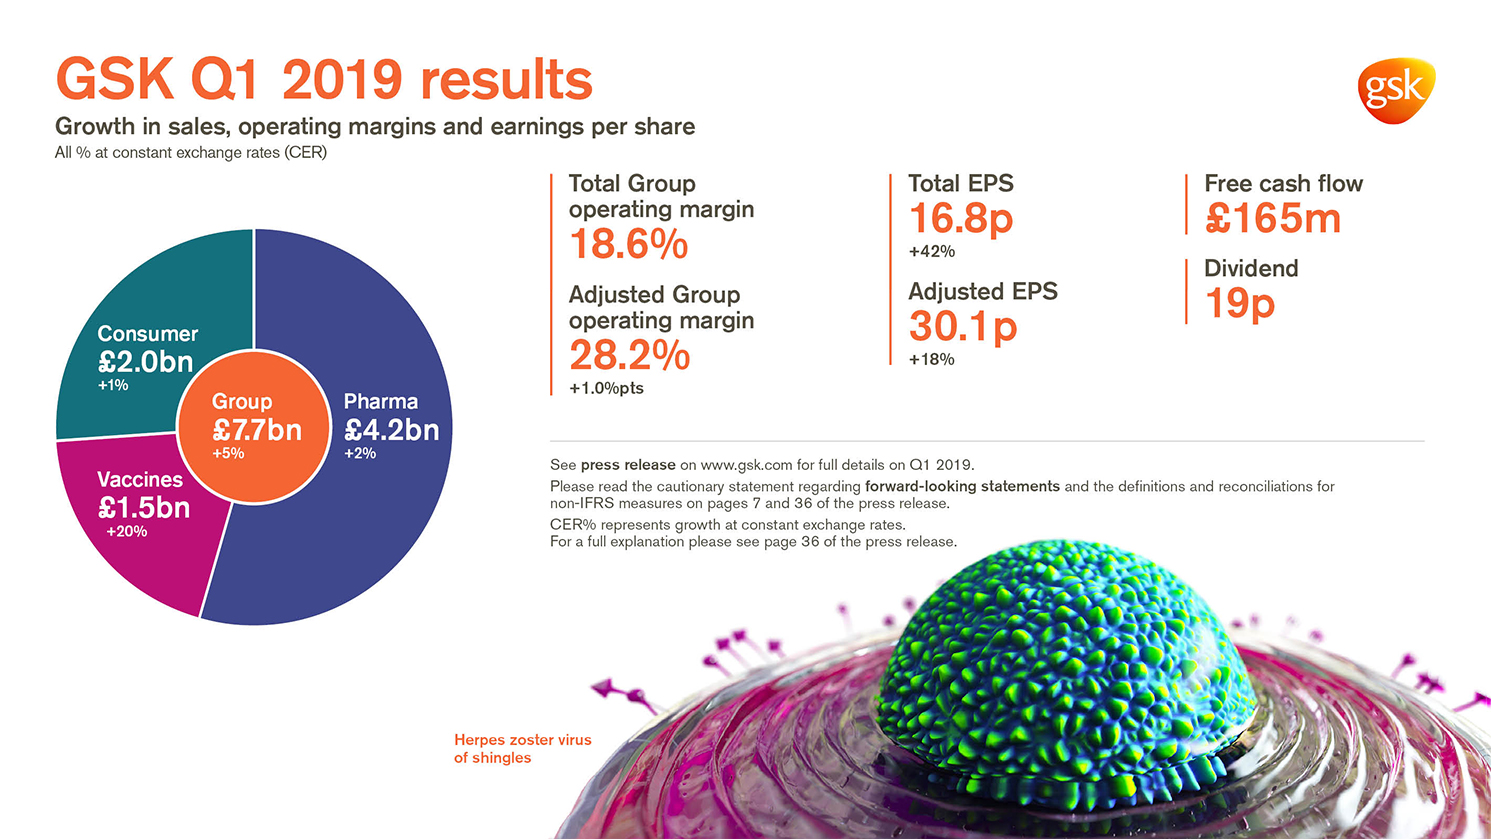 Infographic showing chart of Q1 2019 results